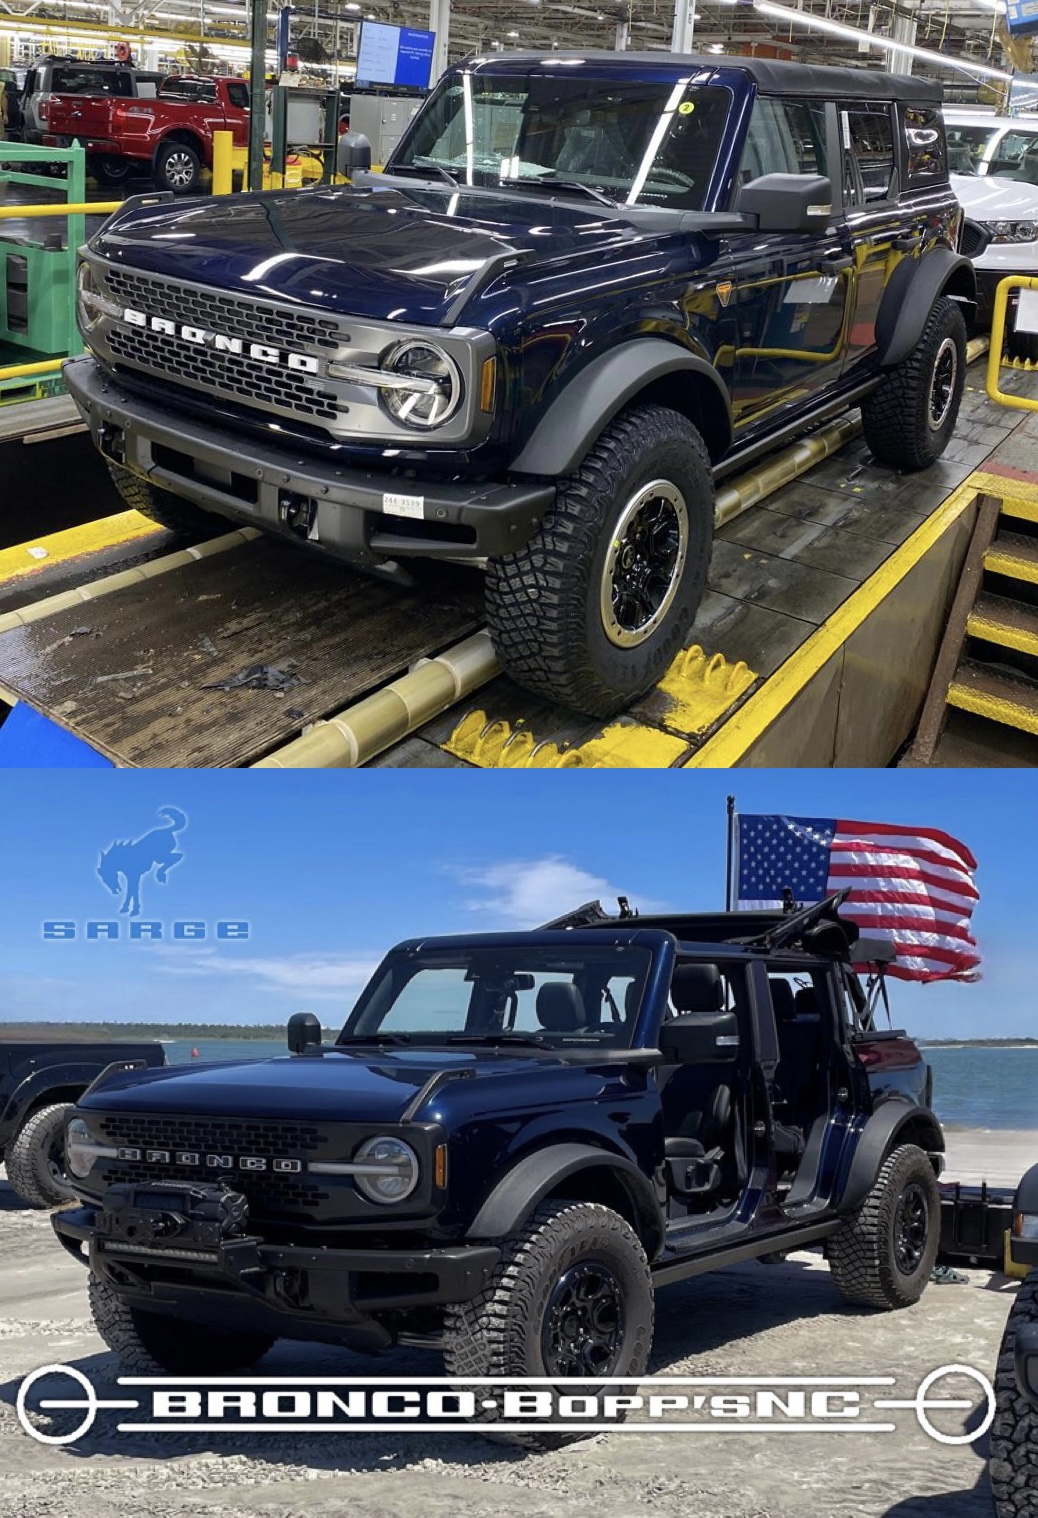 Ford Bronco Then & Now: show your assembly line Bronco and current Bronco picture 6DDFCFD7-DDD8-4447-B67A-9A312EE5CA6C